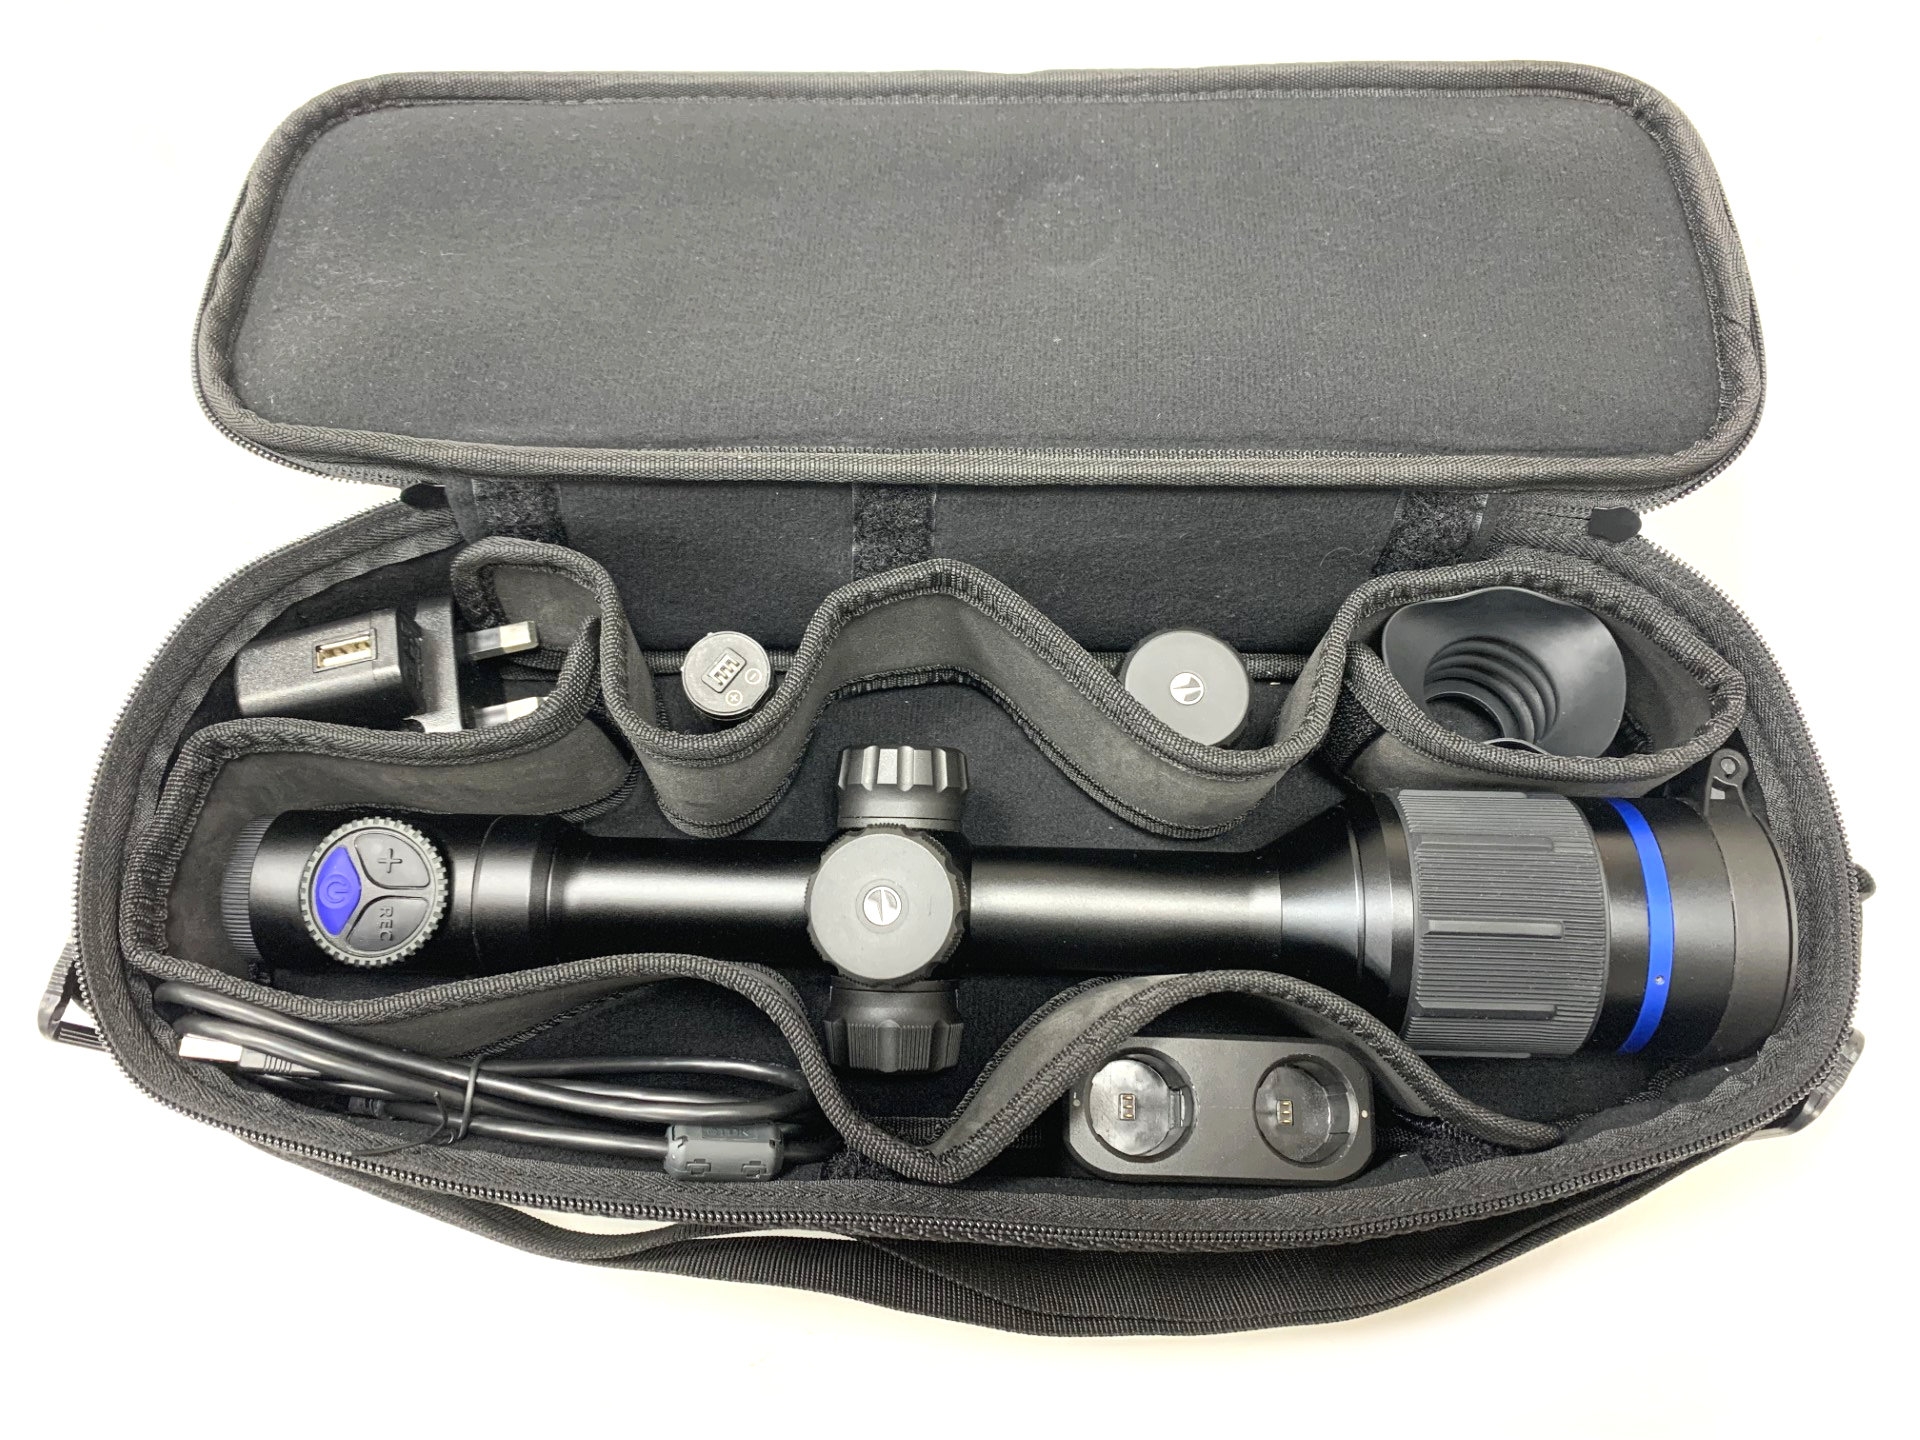 pulsar used thermion 2 xp50 rifle scope